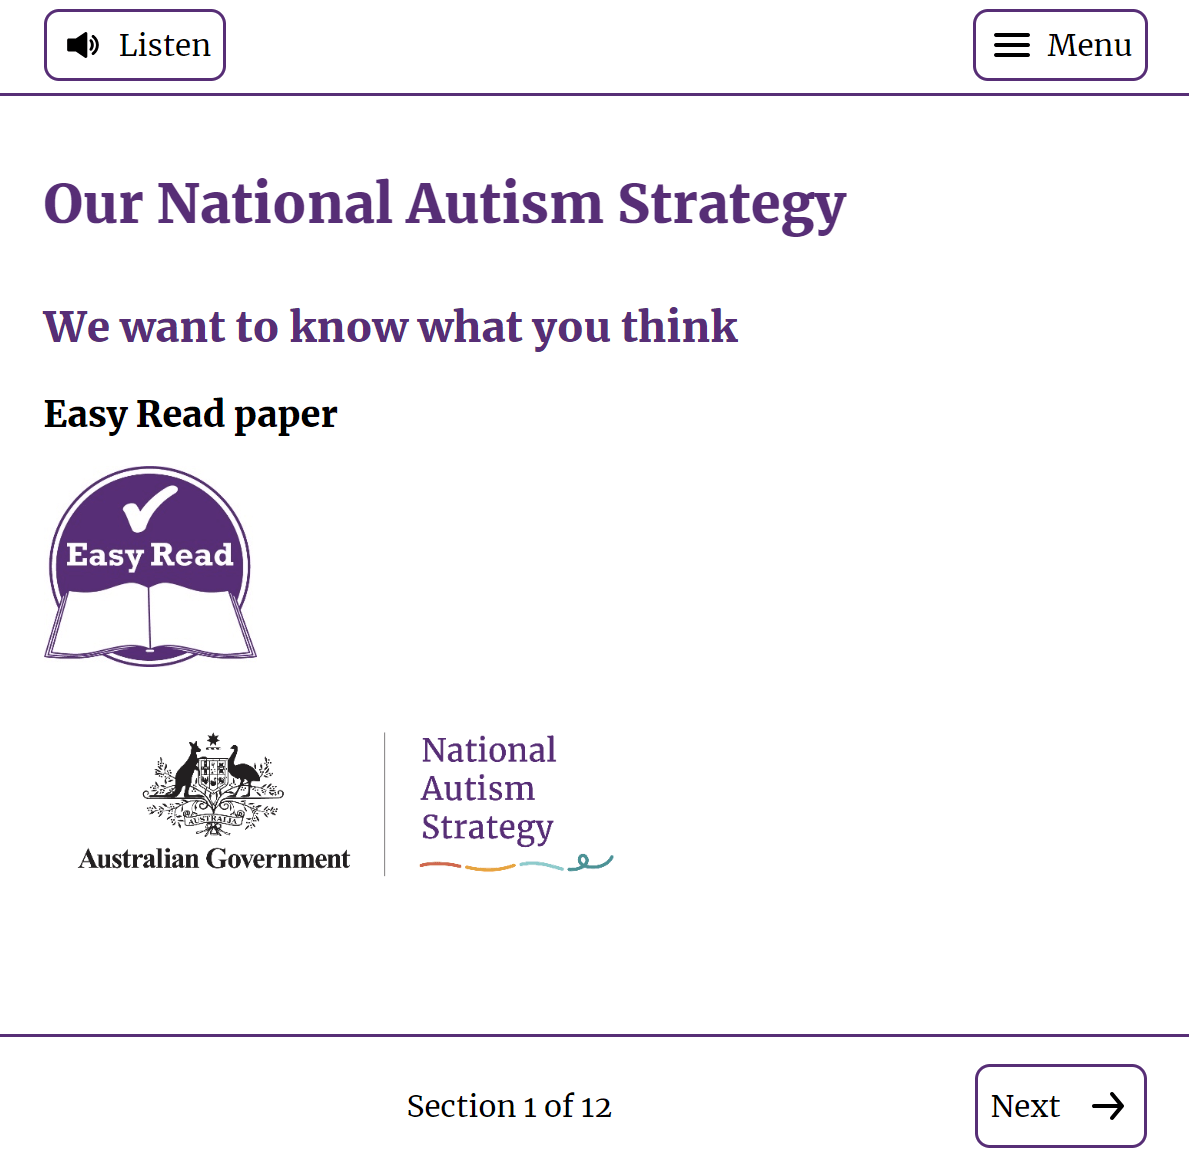 [Australie] « Our National Autism Strategy – We want to know what you think » (Australian Government)